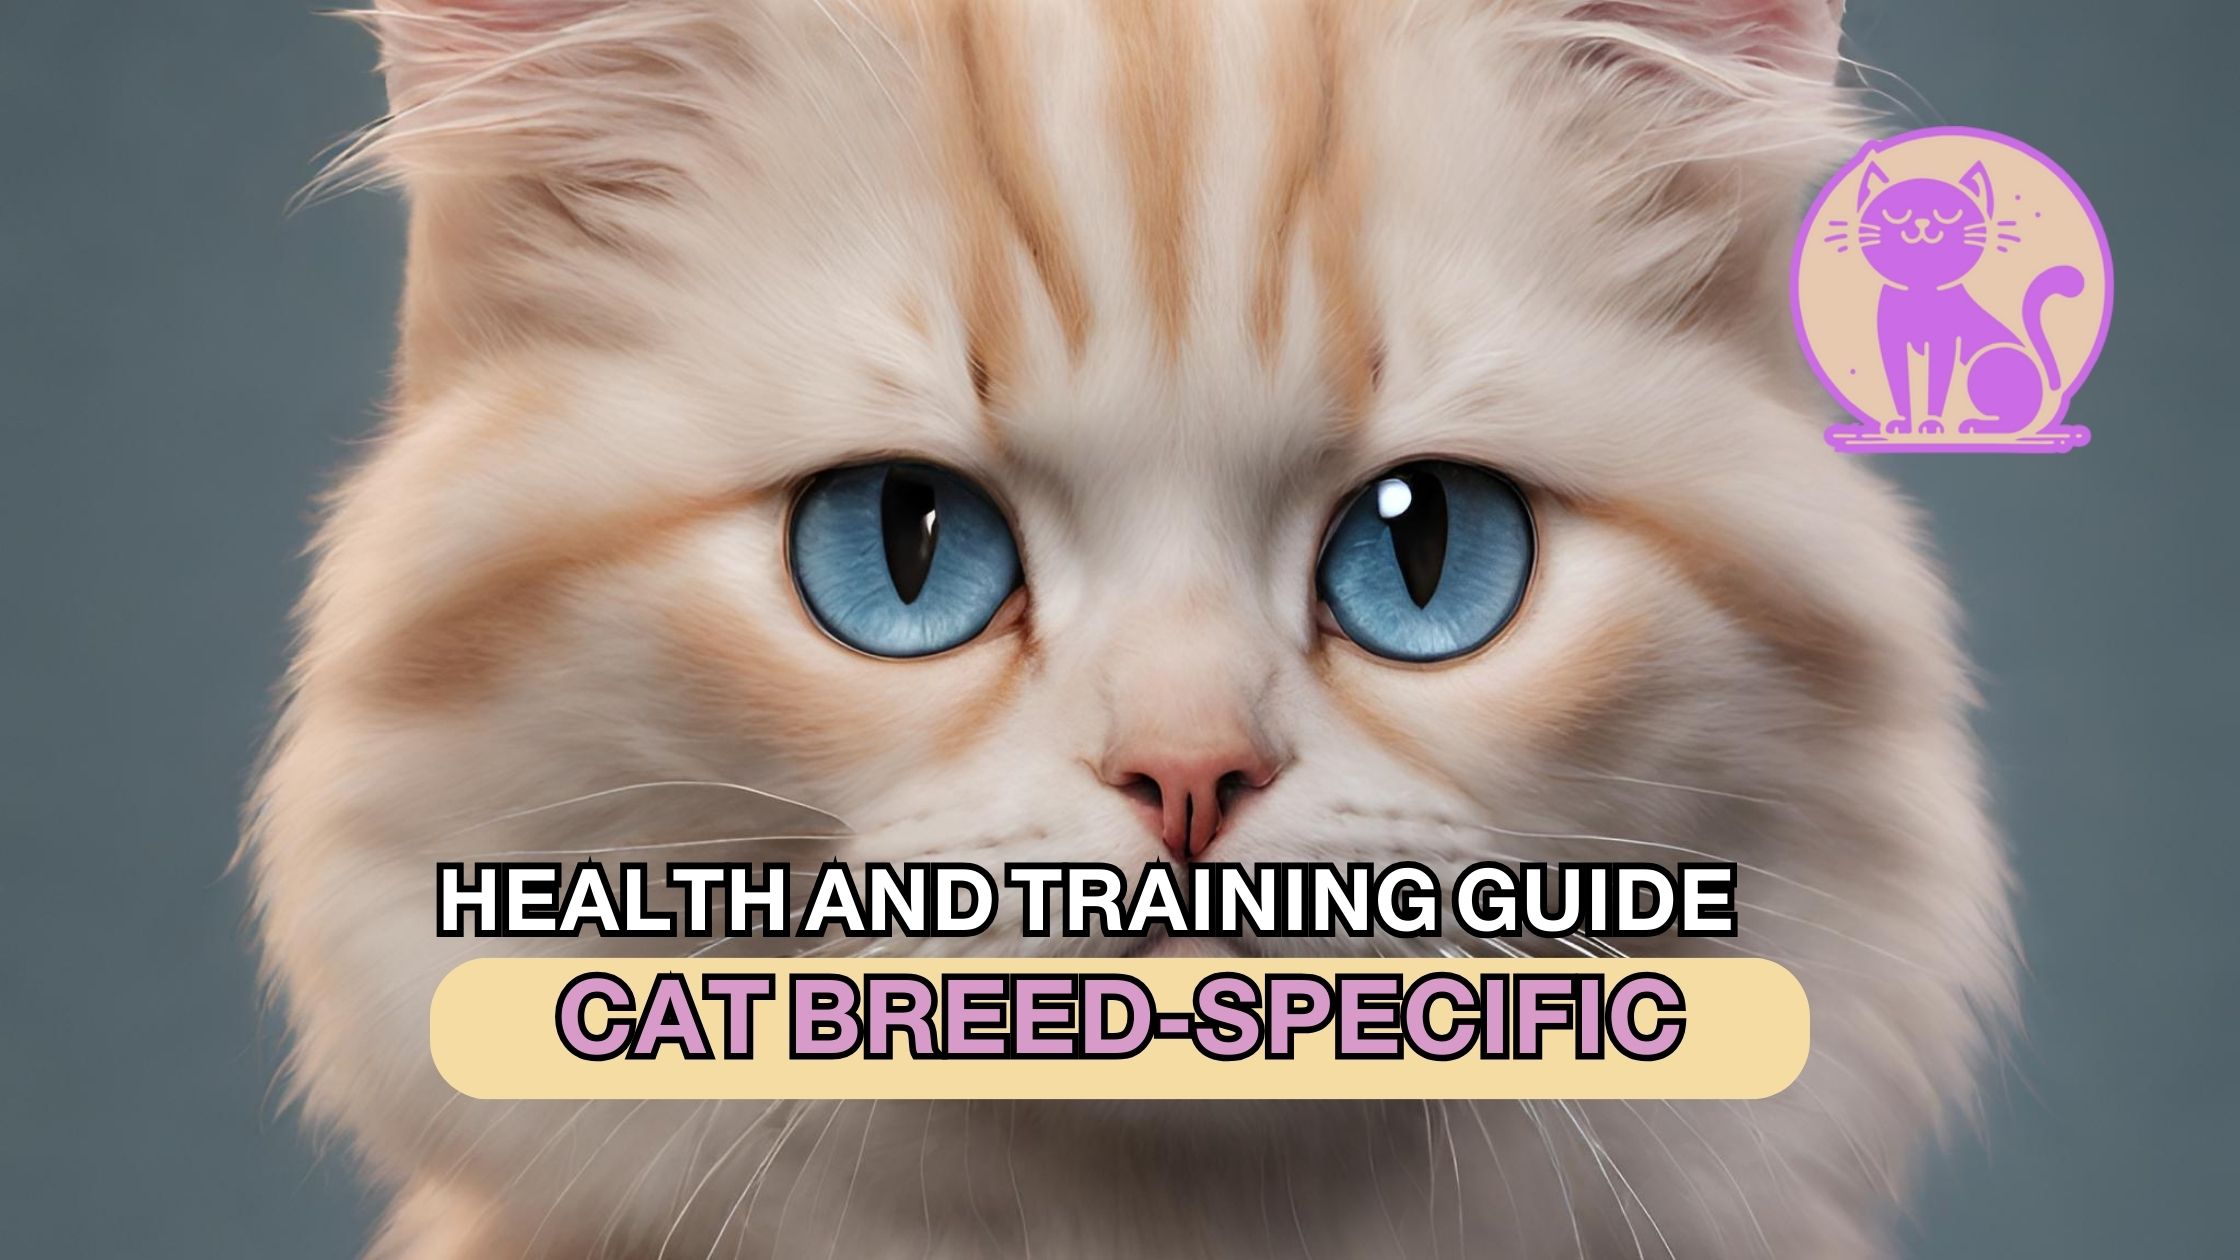 Cat Breed-Specific Health and Training Guide